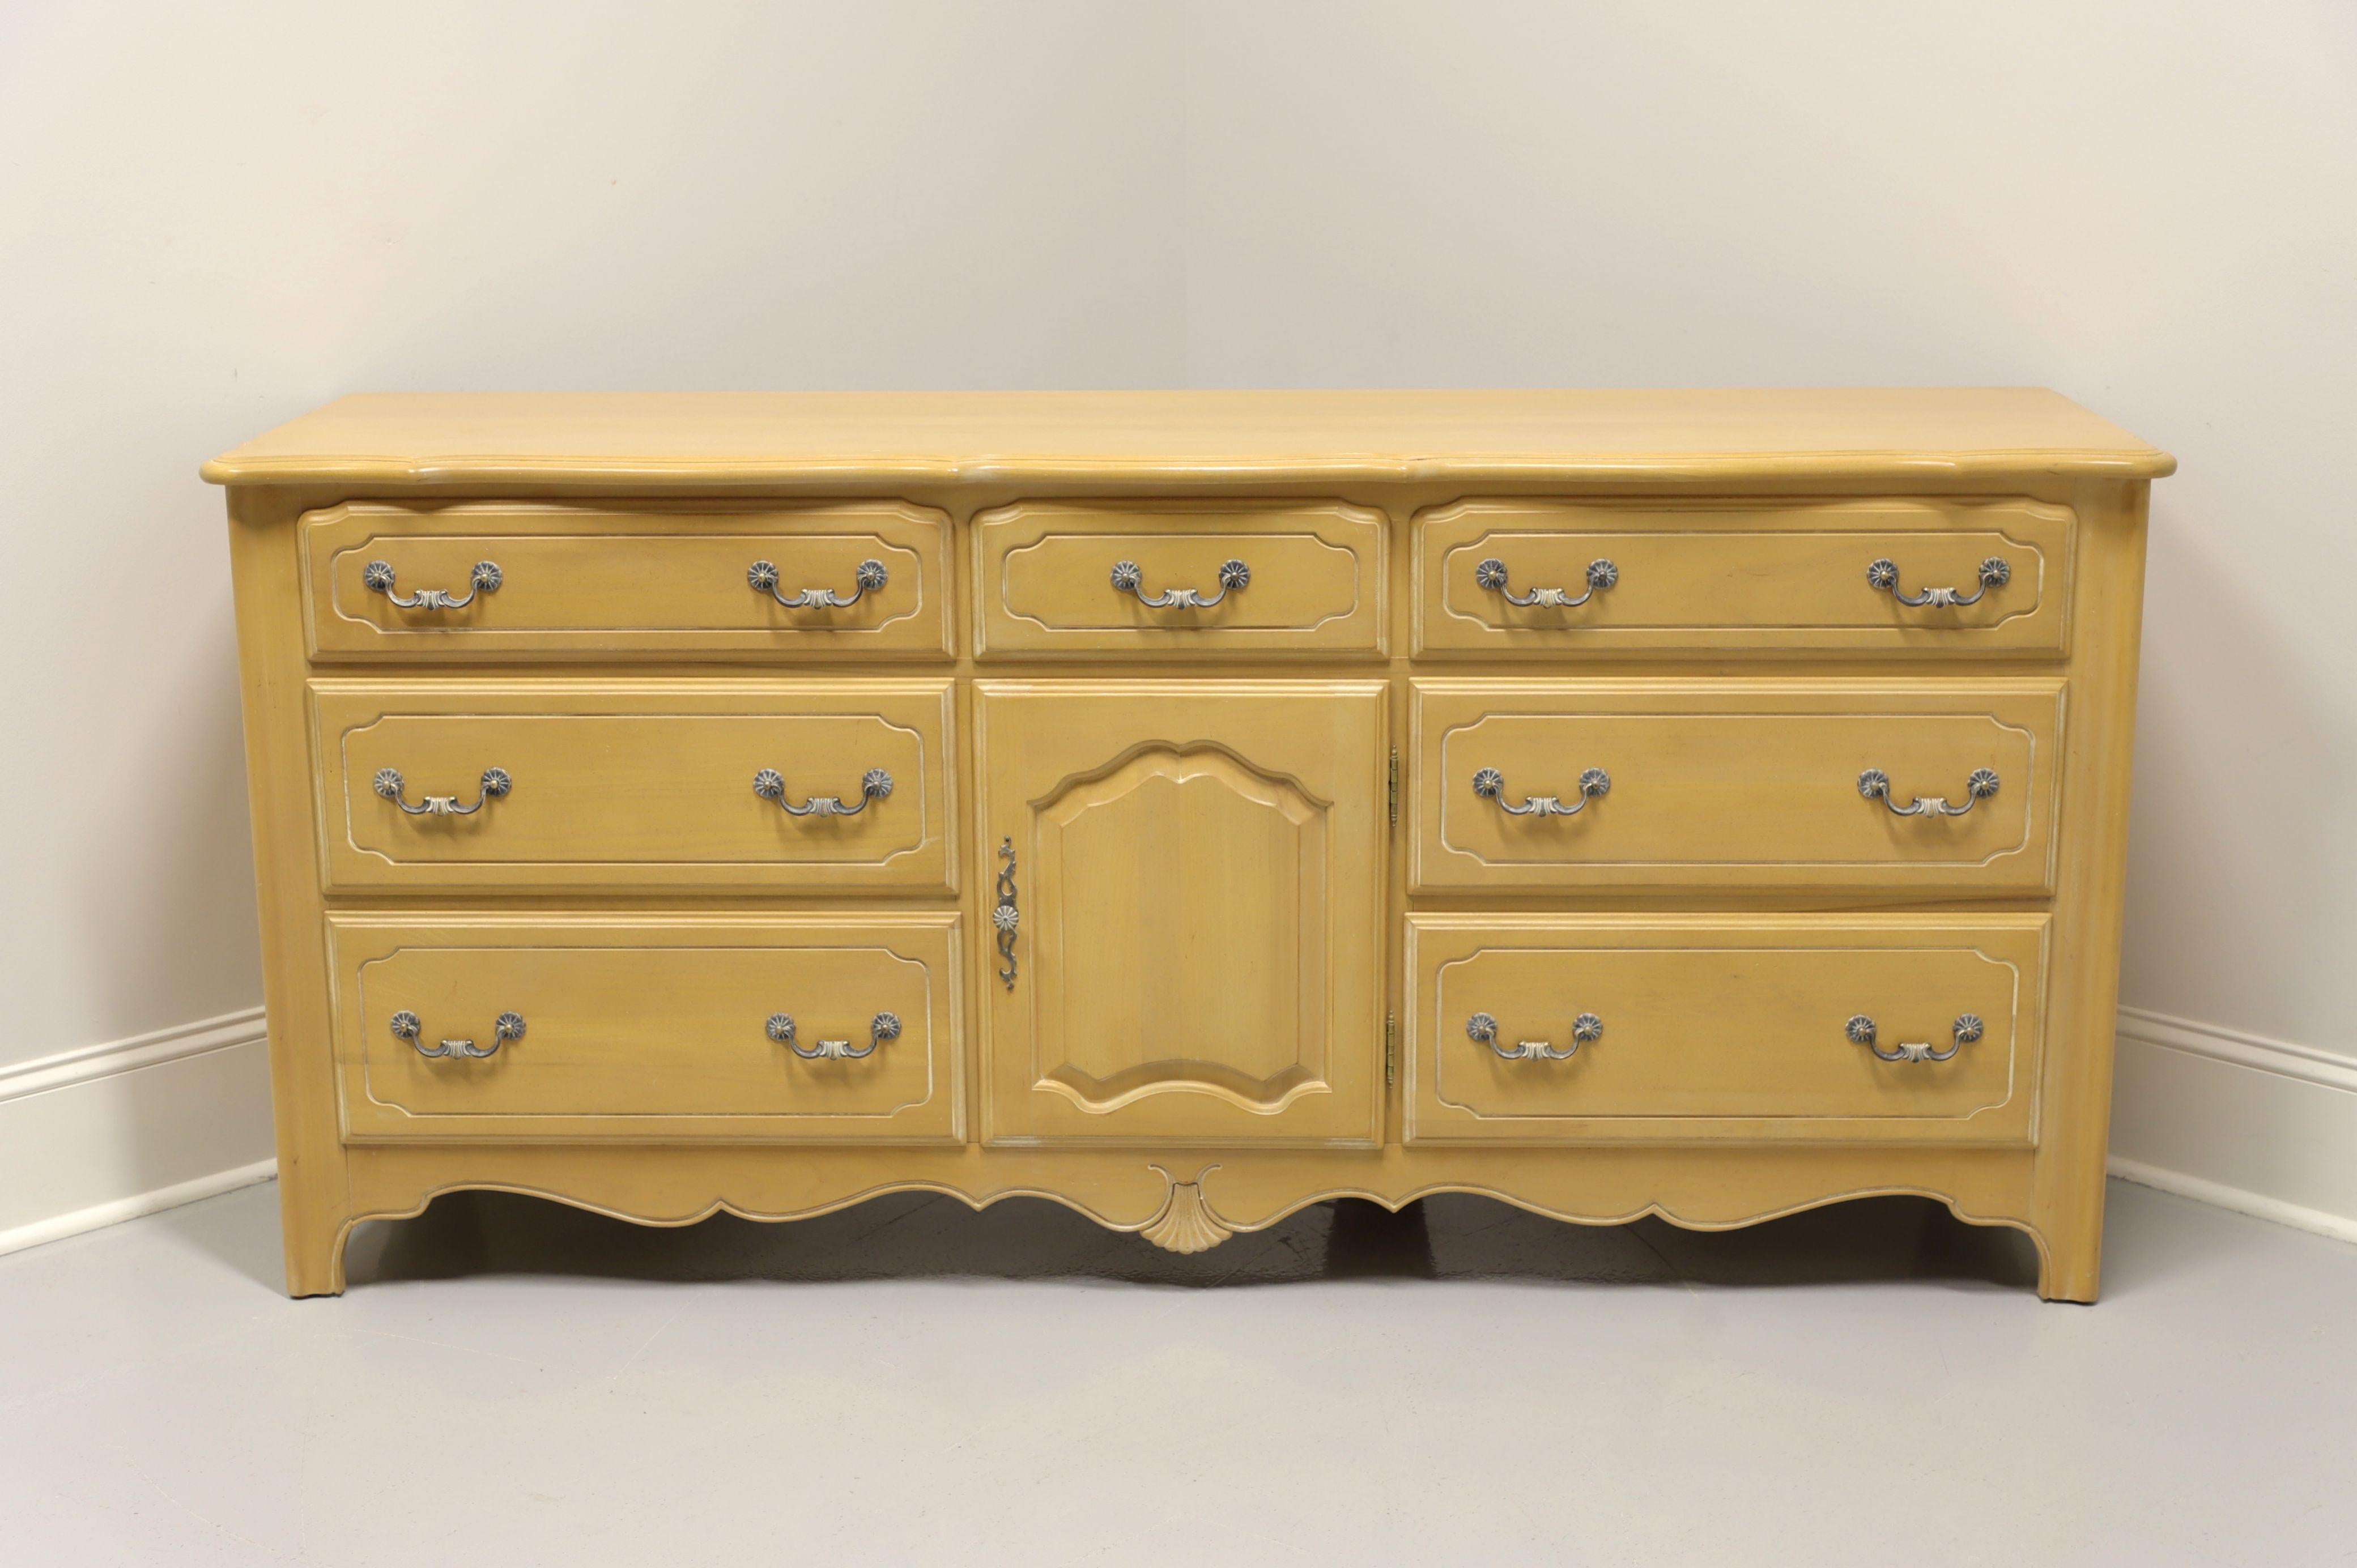 A triple dresser in the French Country style, unbranded, similar quality to Thomasville. Solid hardwood with distressed whitewashed finish and antiqued brass hardware. Features nine dovetail drawers, two of which are behind center cabinet door and